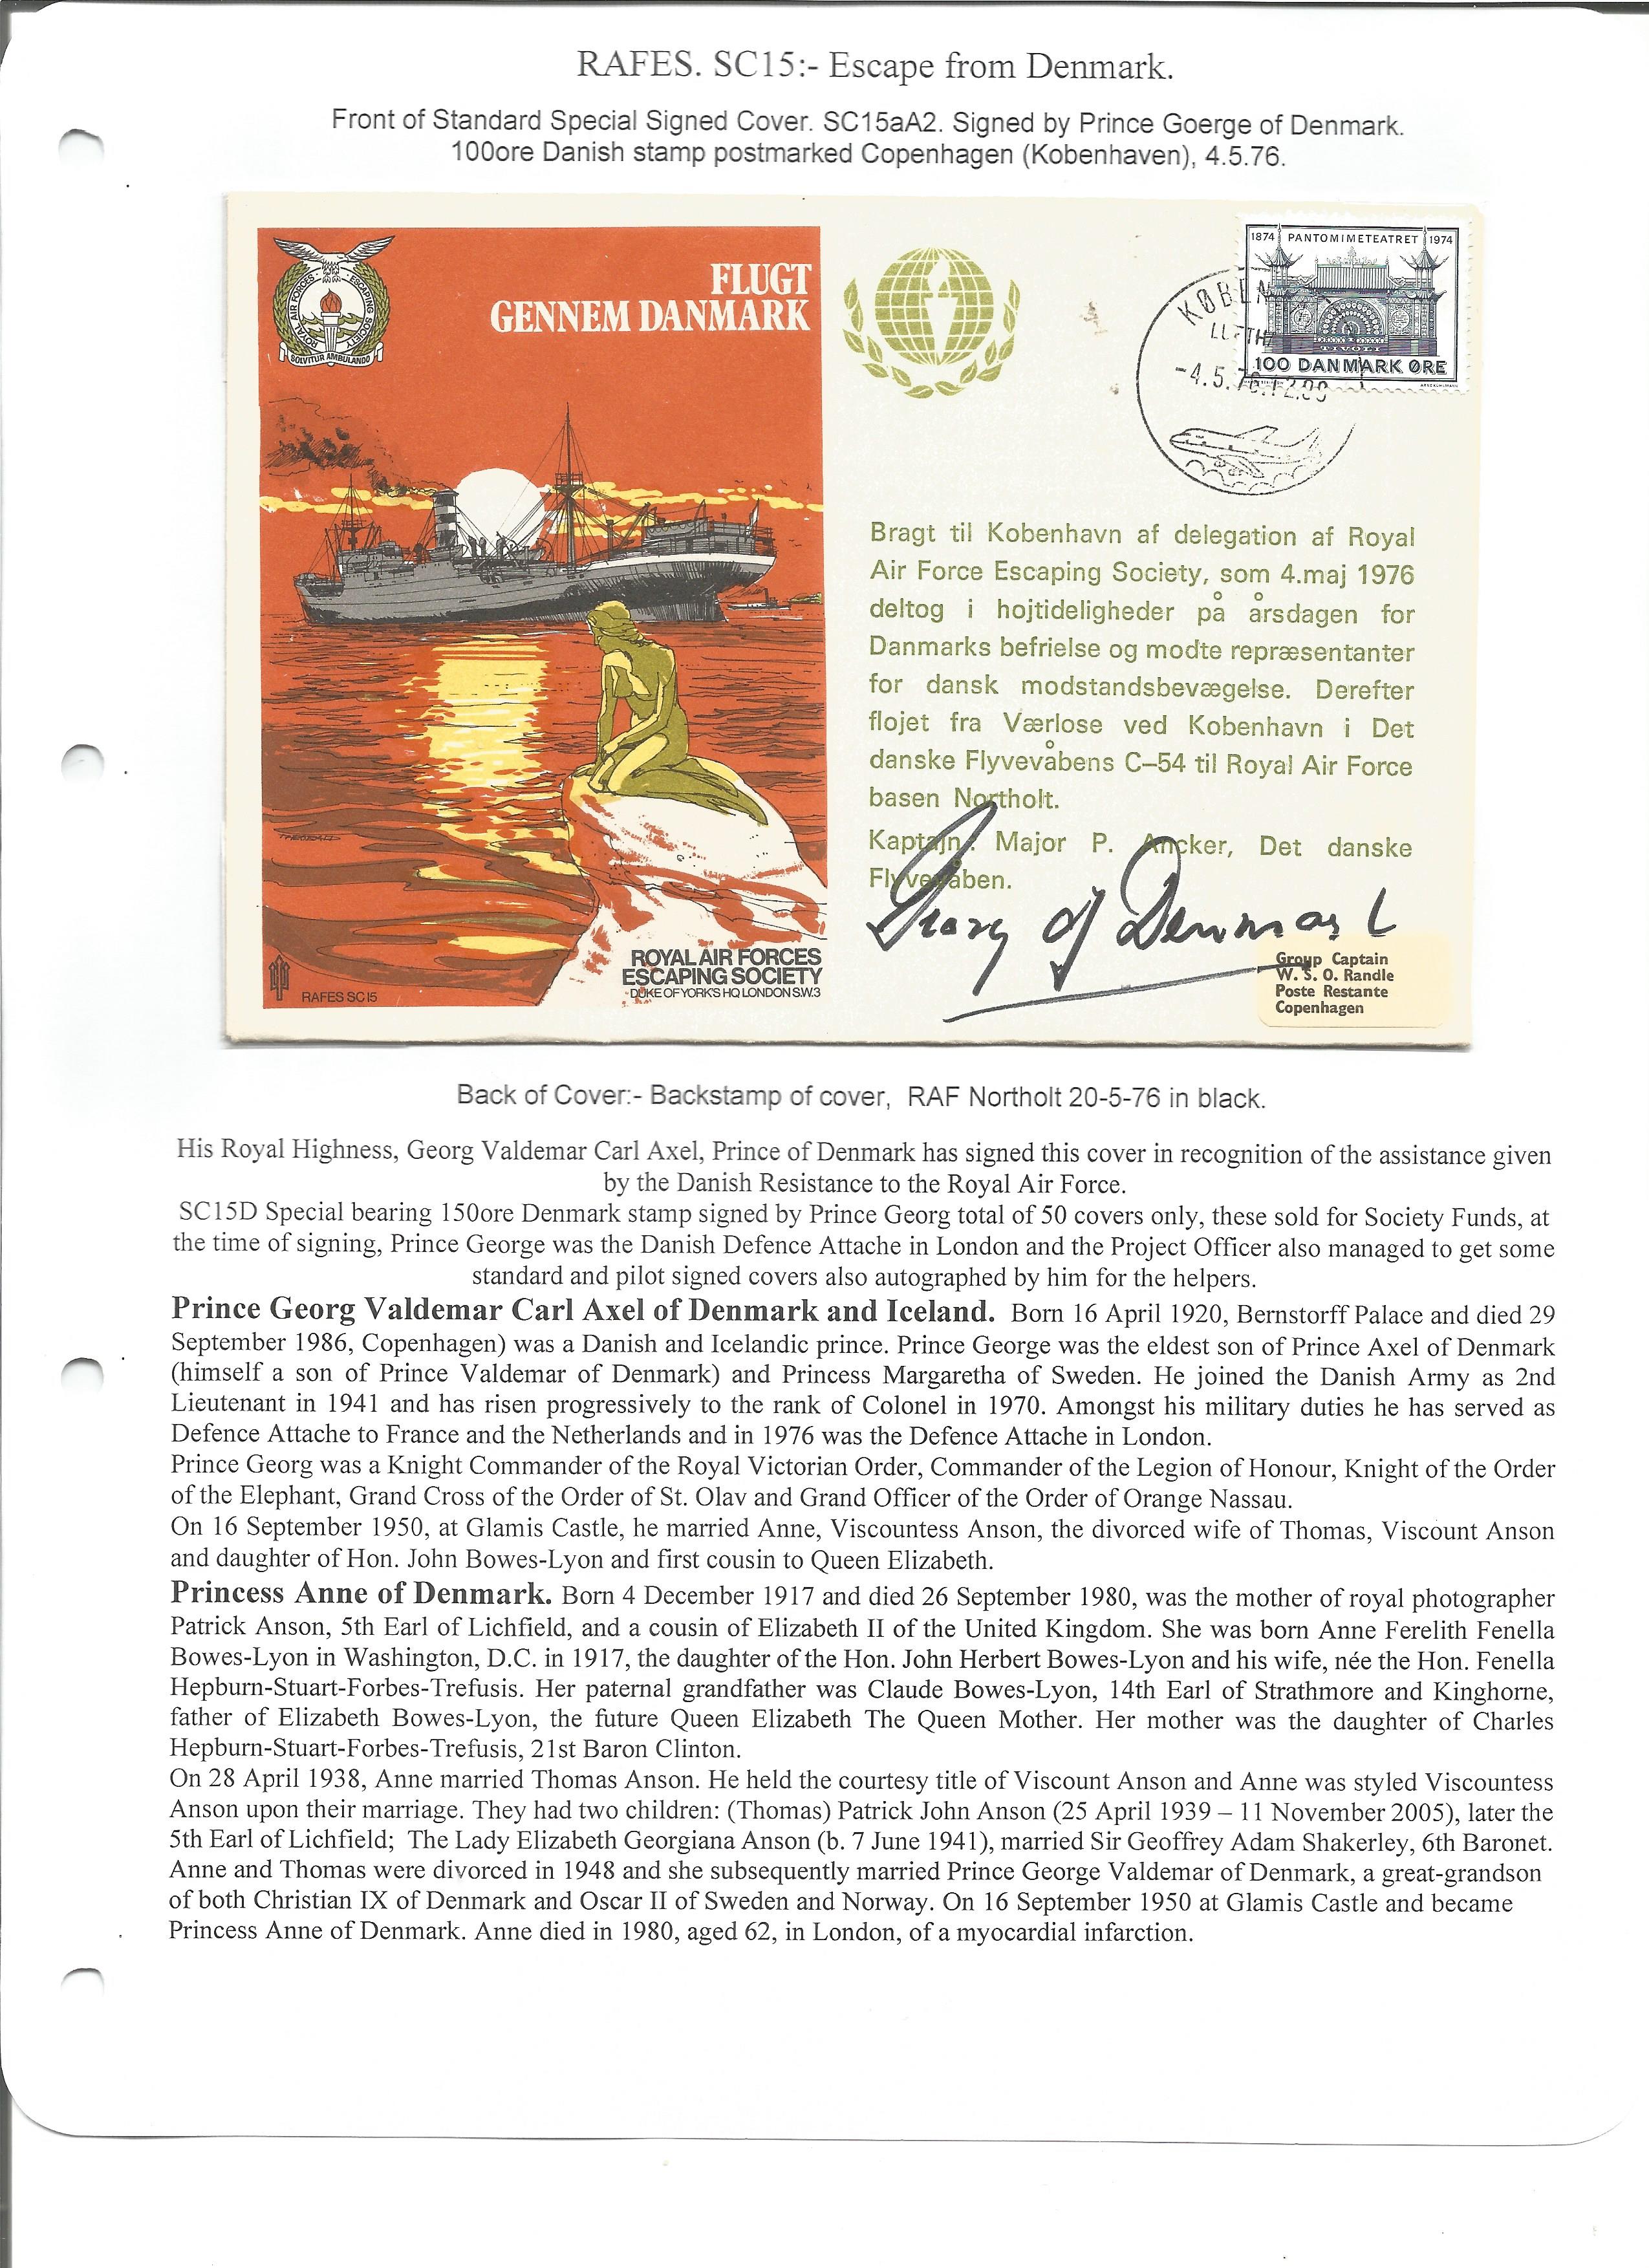 Prince George of Denmark signed special Escape from Denmark RAF escapers cover SC15aA2. 100ore